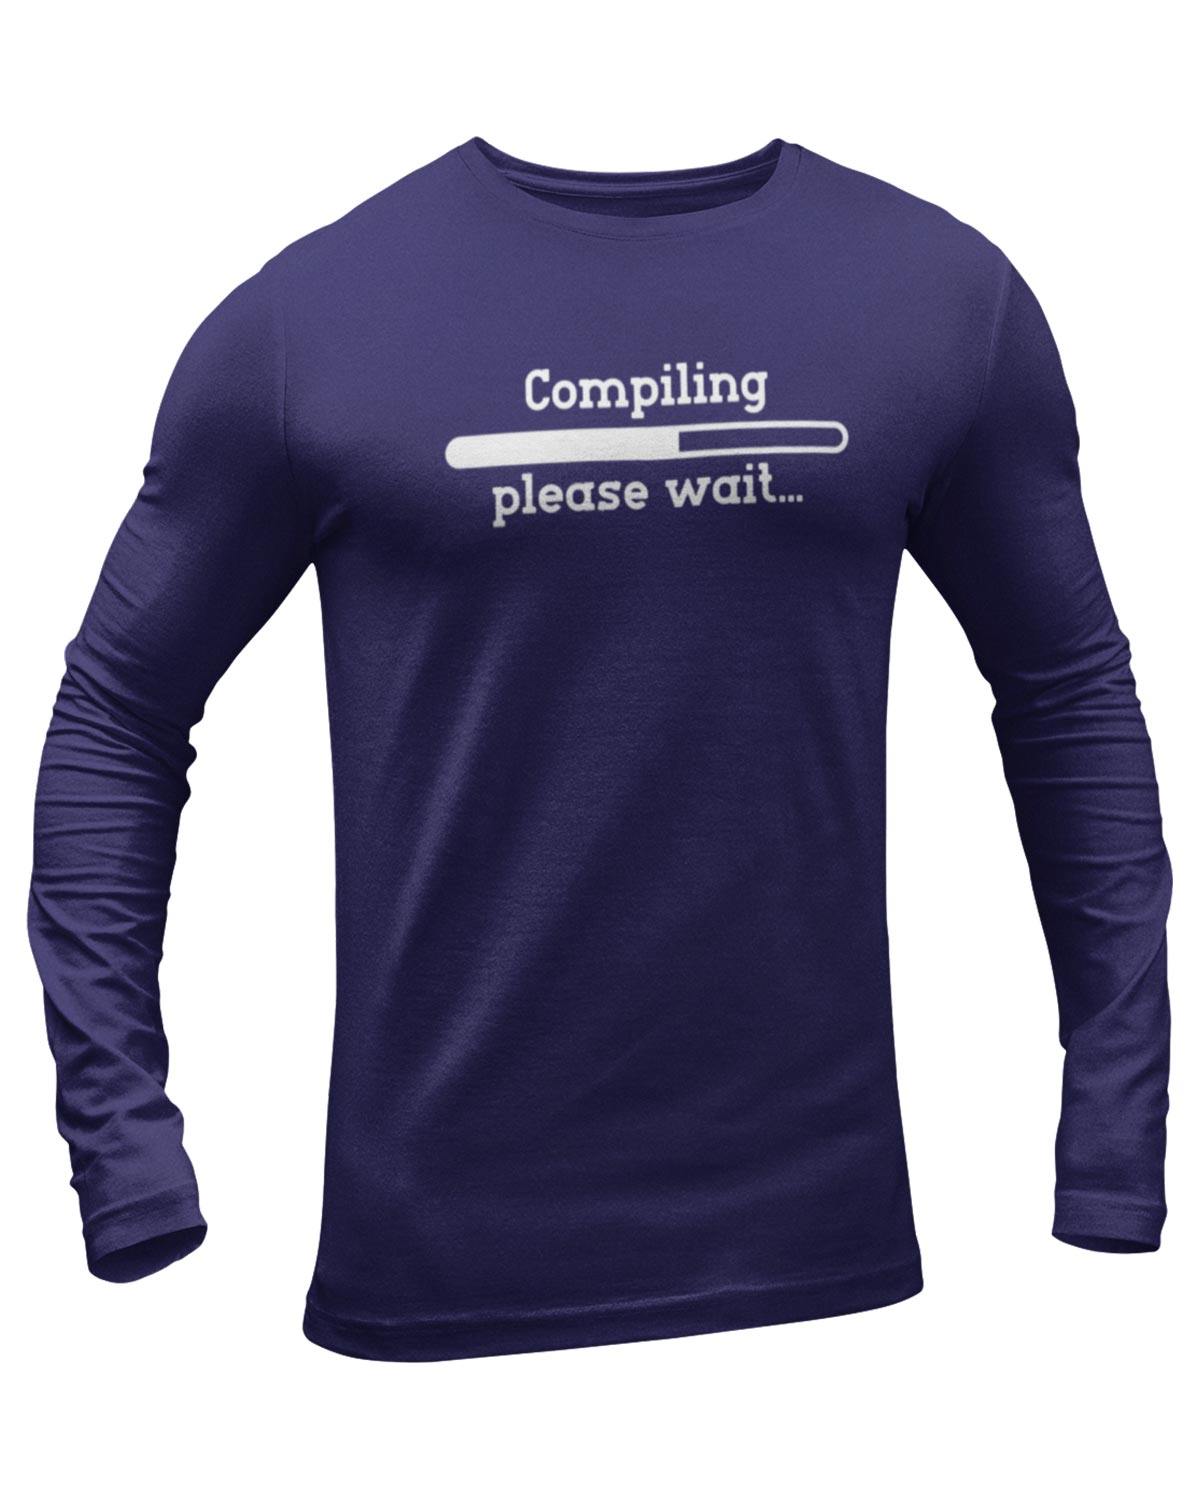 Compiling Please Wait Full Sleeve Geek T-Shirt